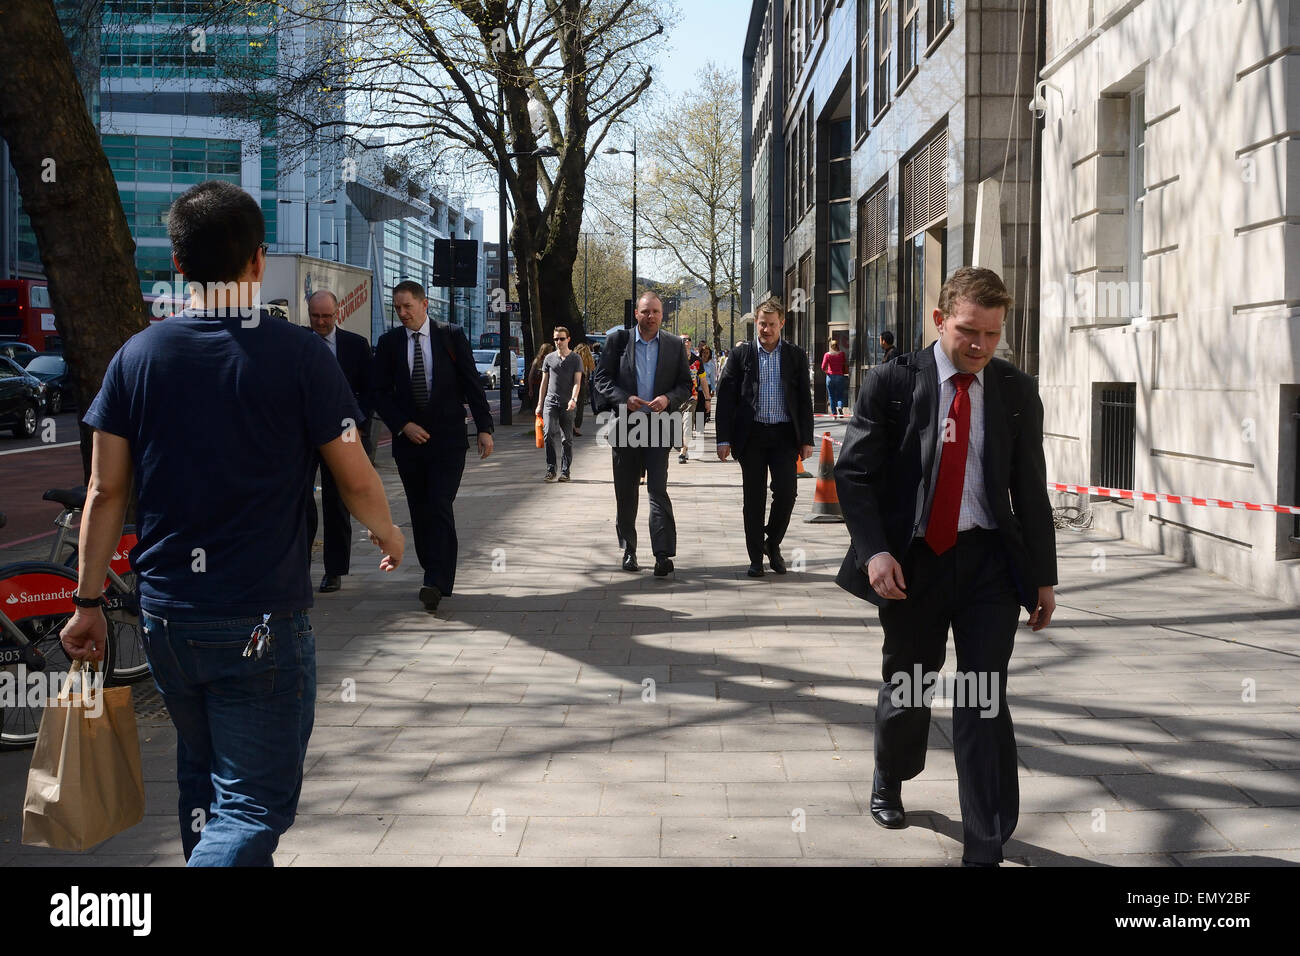 man in jeans & T-shirt walking past men in suits on pavement in London Stock Photo